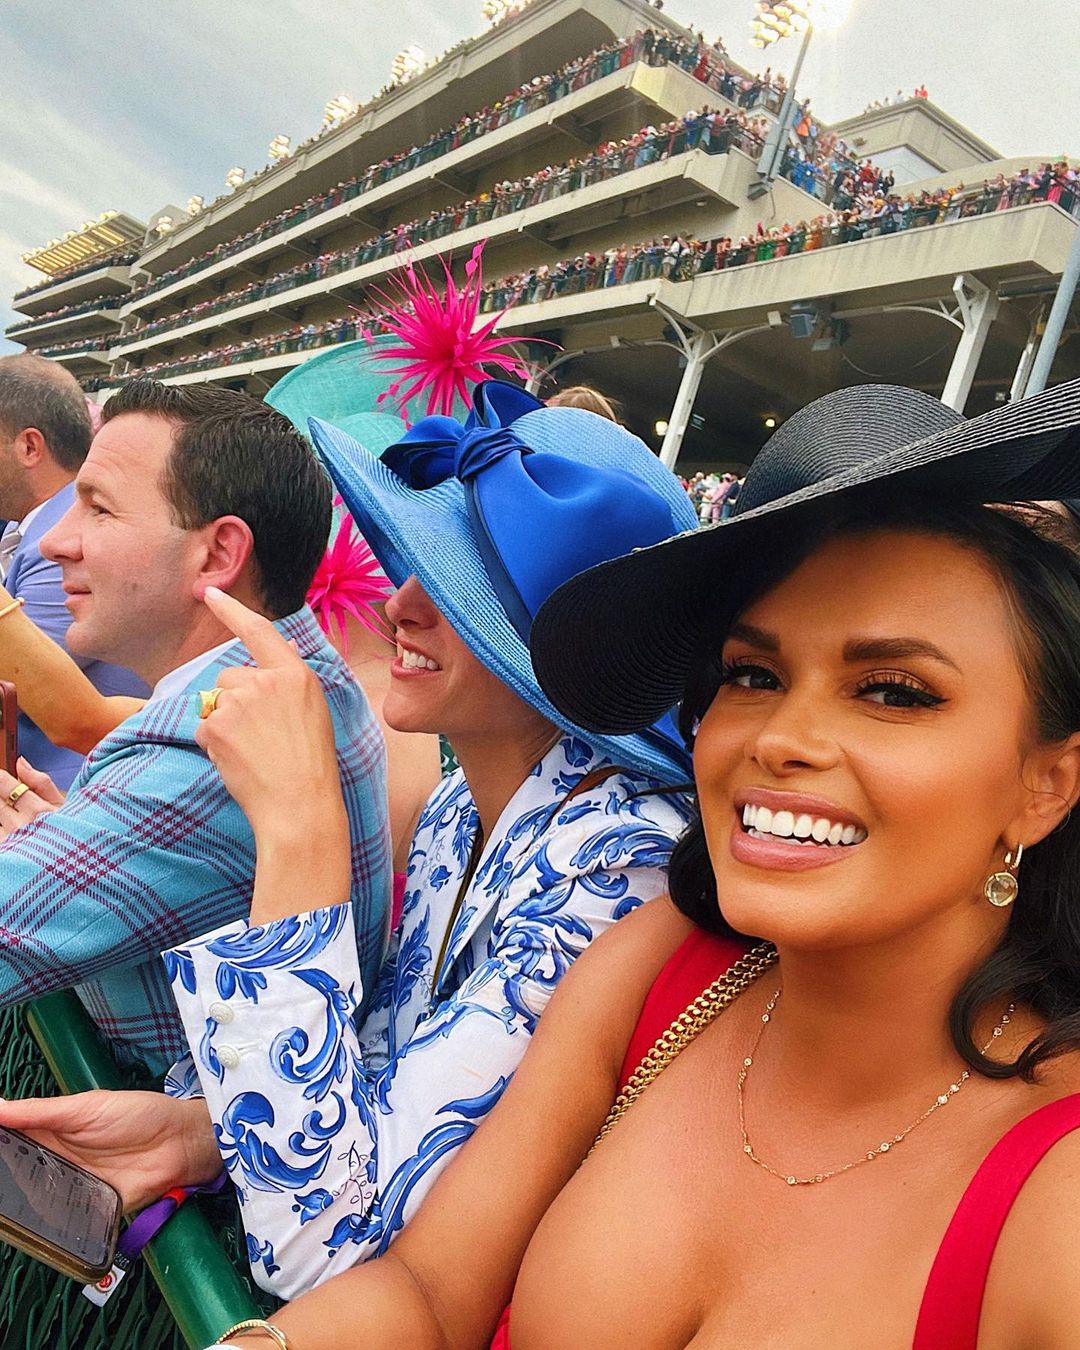 Joy Taylor at the Kentucky Derby is Impressive! - Photo 1